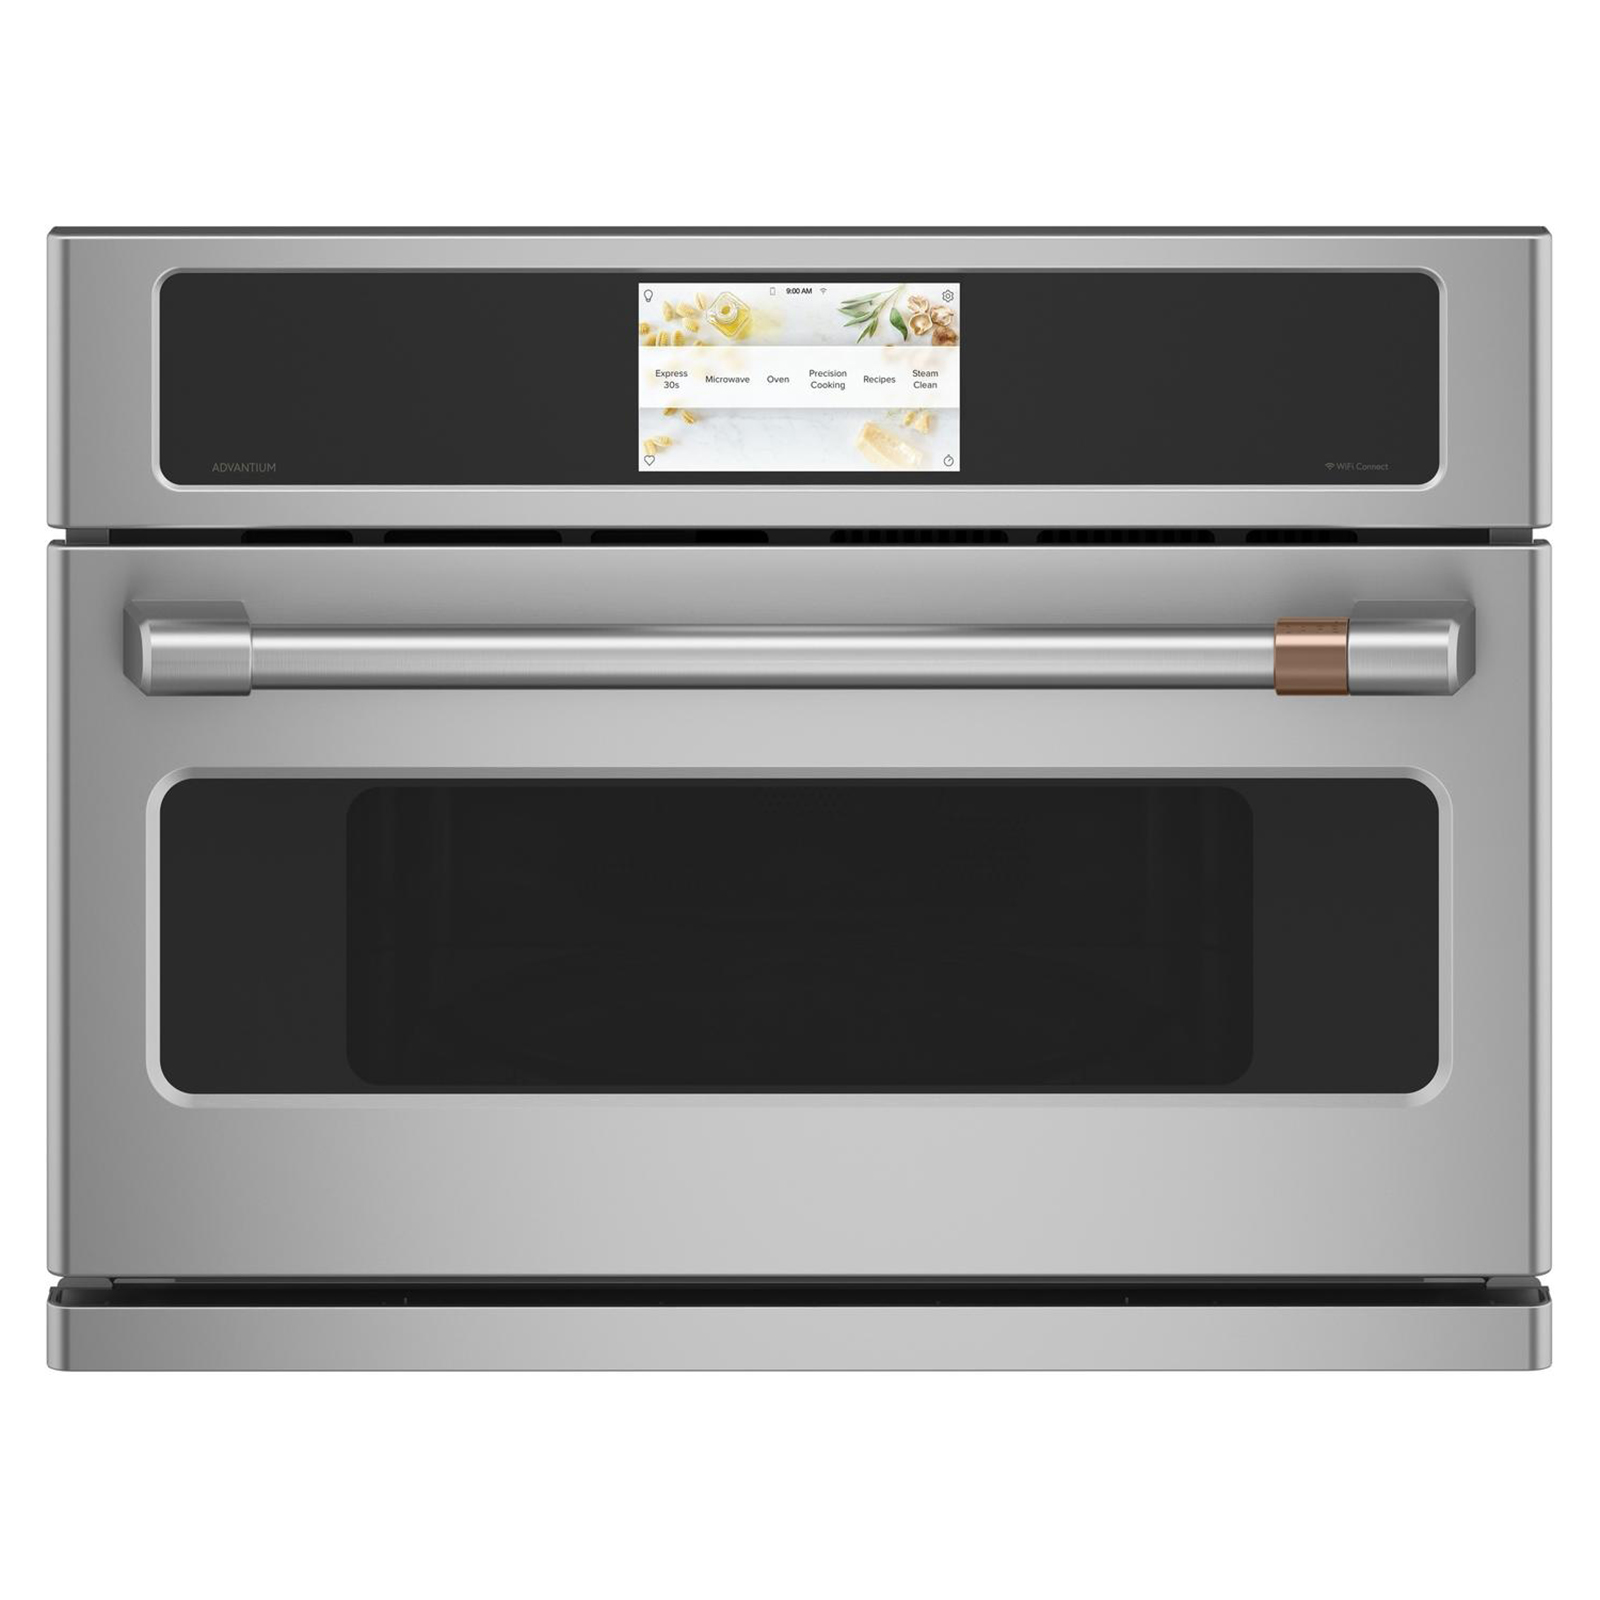 CAFE CSB912P2NS1 Café 1.7cu.ft. Smart Oven with Advantium Technology – Minimizes the Time You Spend on Cooking